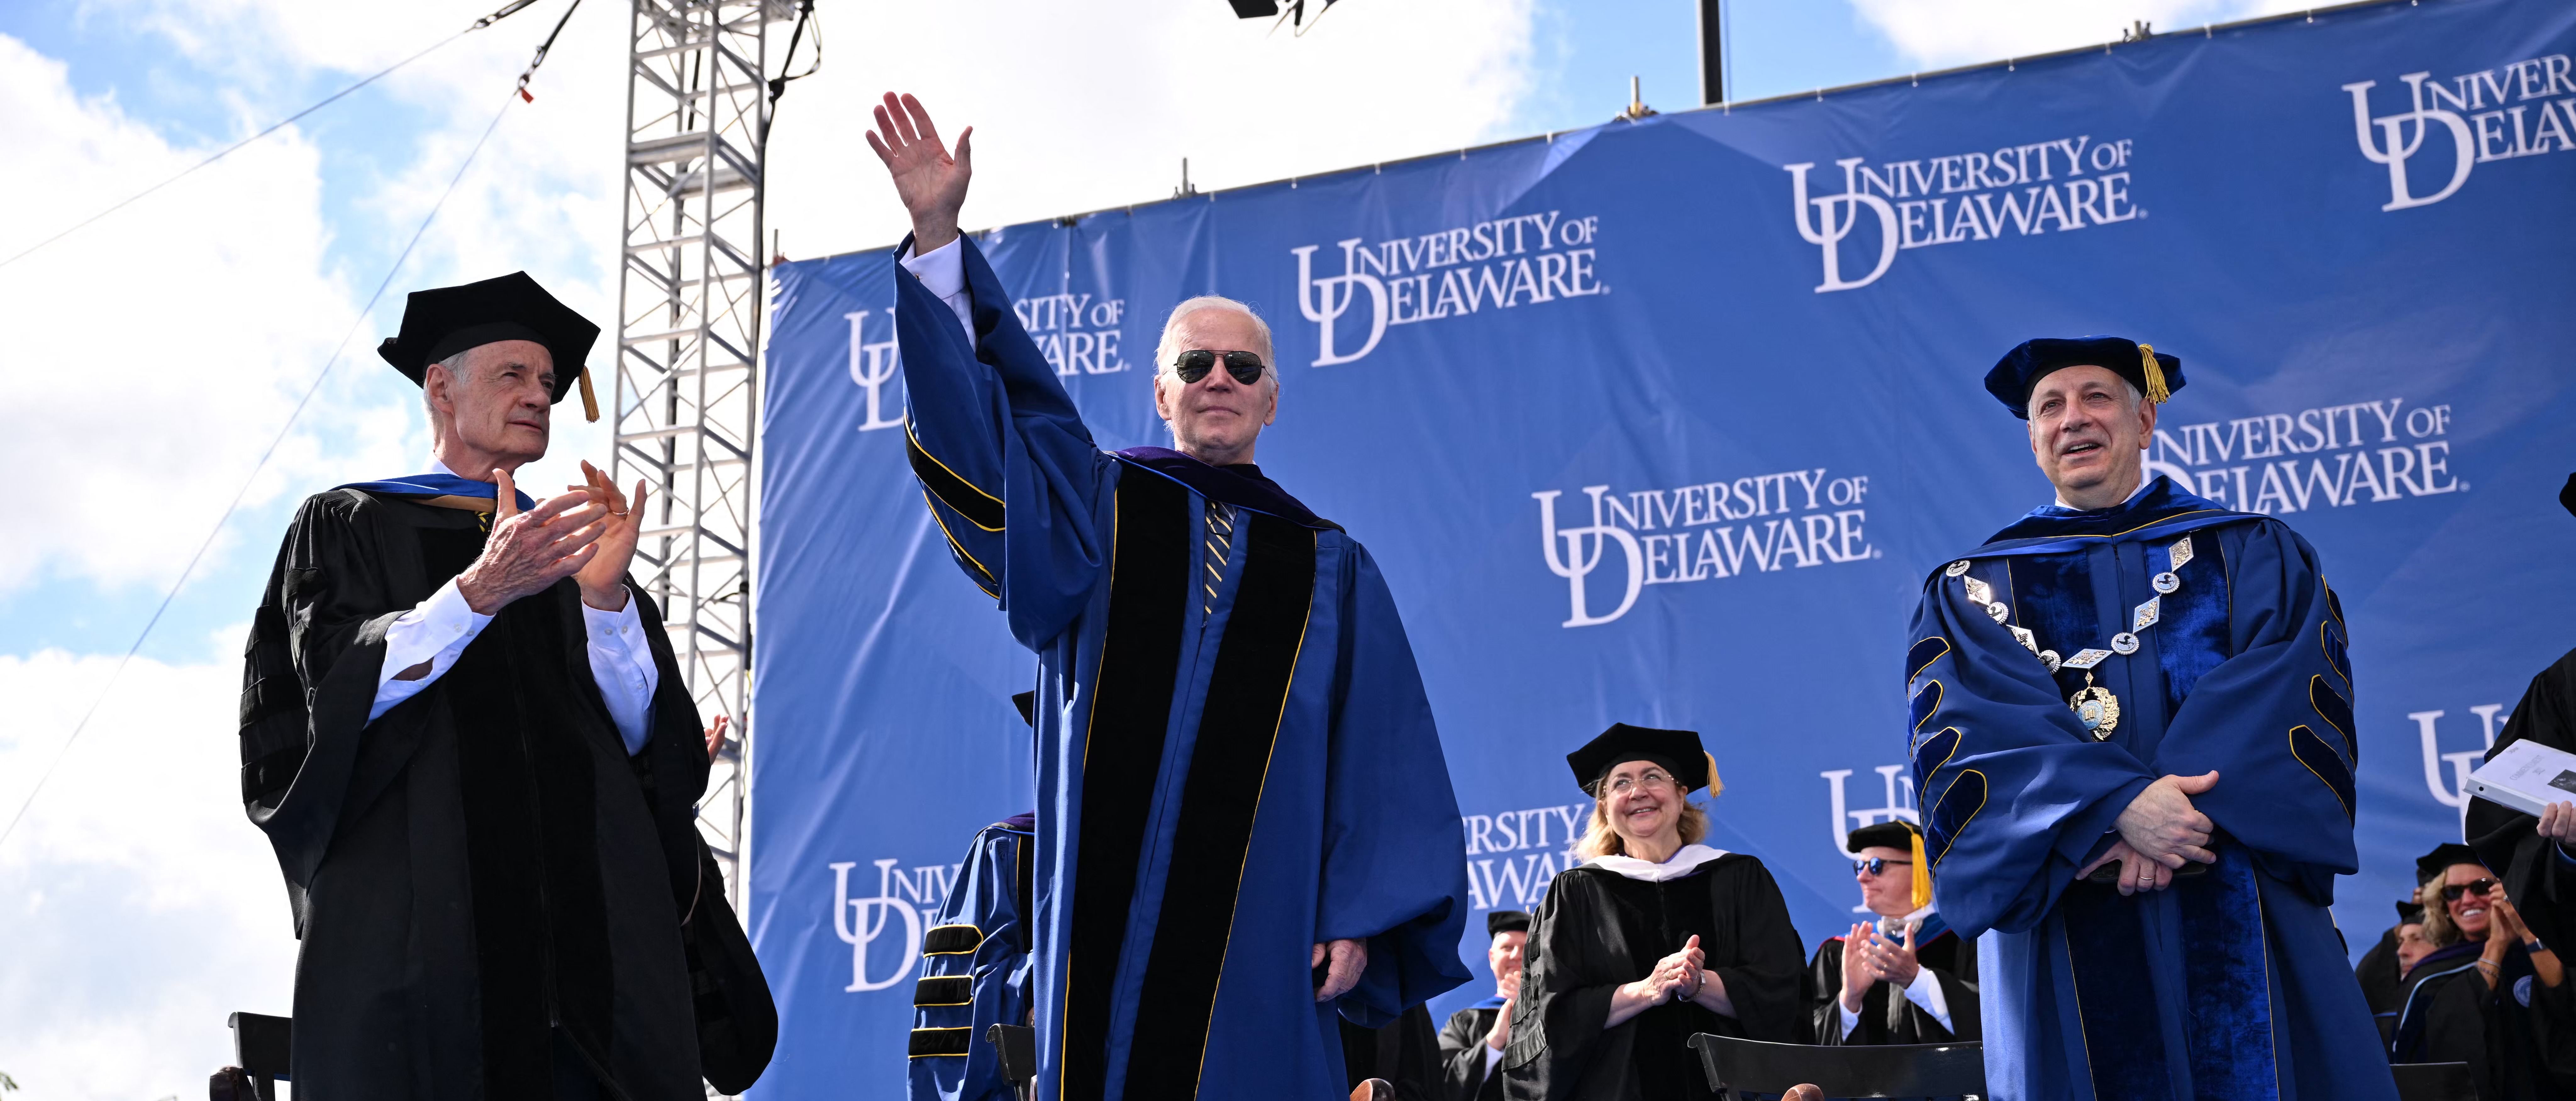 US President Joe Biden, with with University of Delaware President Dennis Assanis (R) and Senator Tom Carper (L), attends the graduation ceremony for his alma mater, the University of Delaware, at Delaware Stadium, where he will deliver the commencement address, in Newark, Delaware, on May 28, 2022.